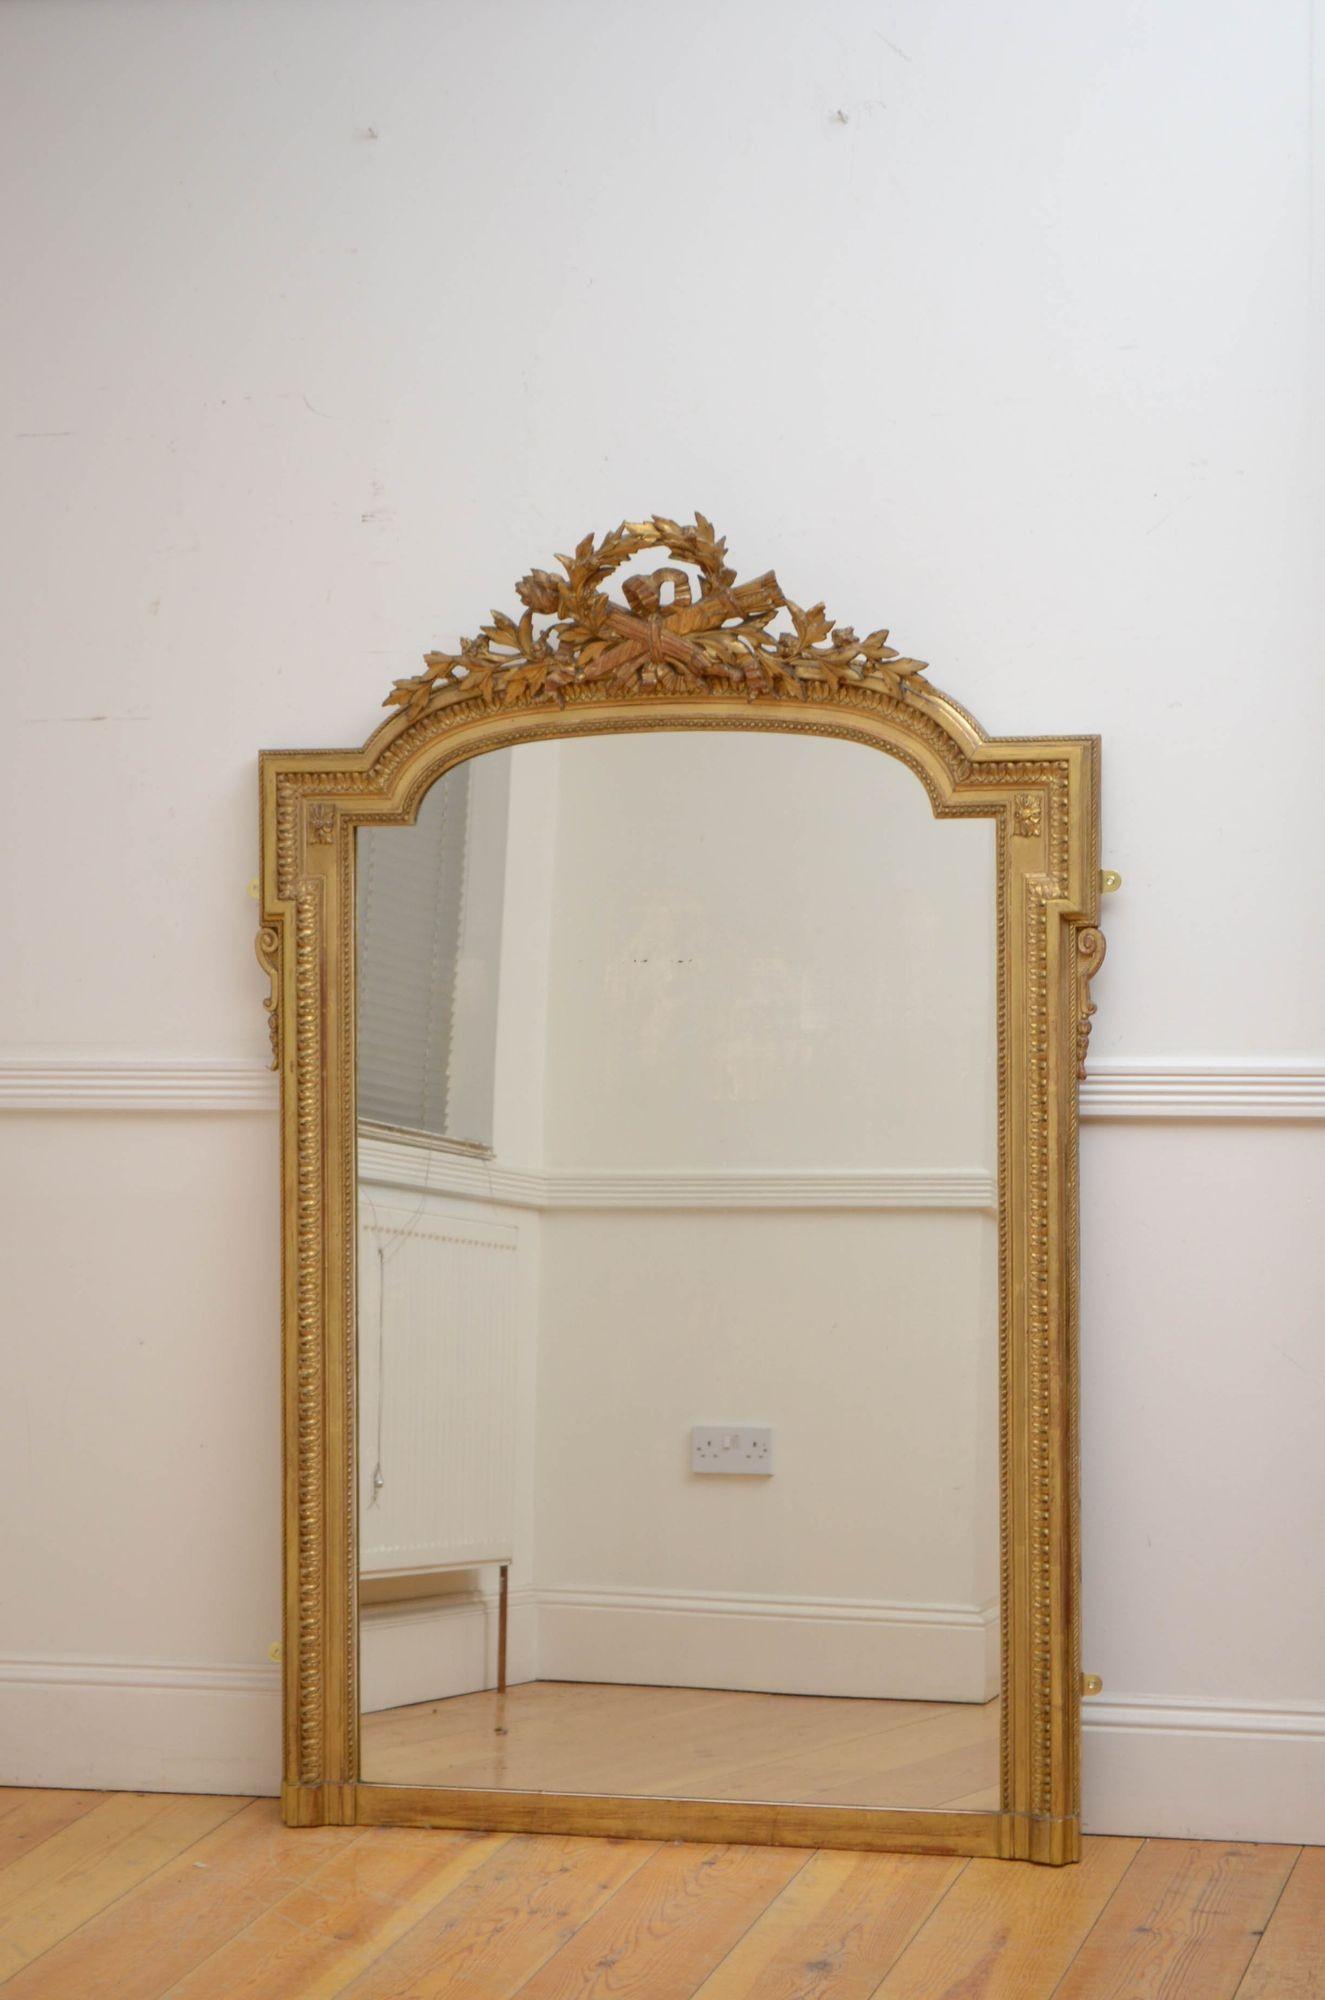 Sn5370 outstanding 19th century giltwood wall mirror, having original glass in beaded and carved giltwood frame with leafy wreath crest. This antique mirror retains its original glass, gilt and backboards, all in home ready condition.